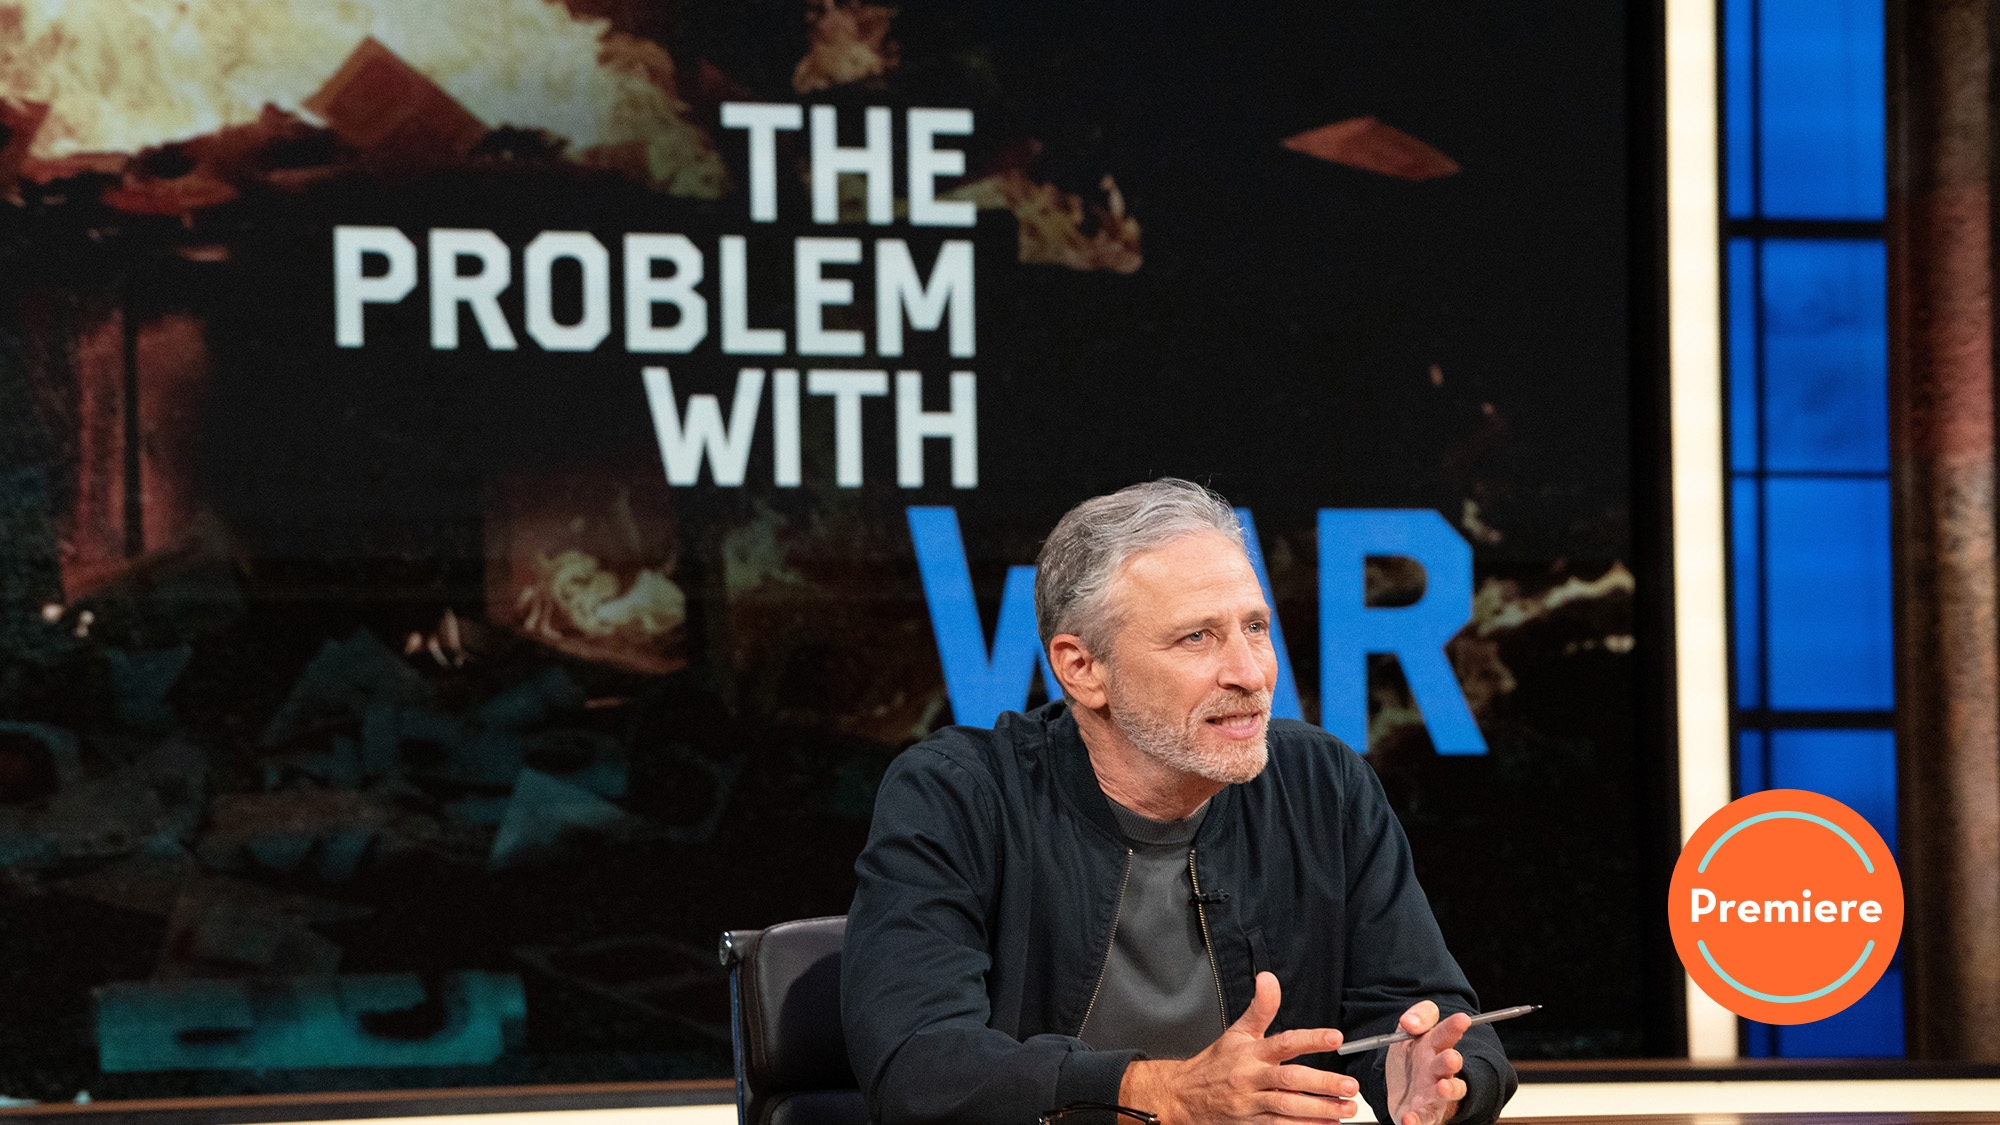 The Problem With Jon Stewart’s new talk show might be his own tremendous shadow